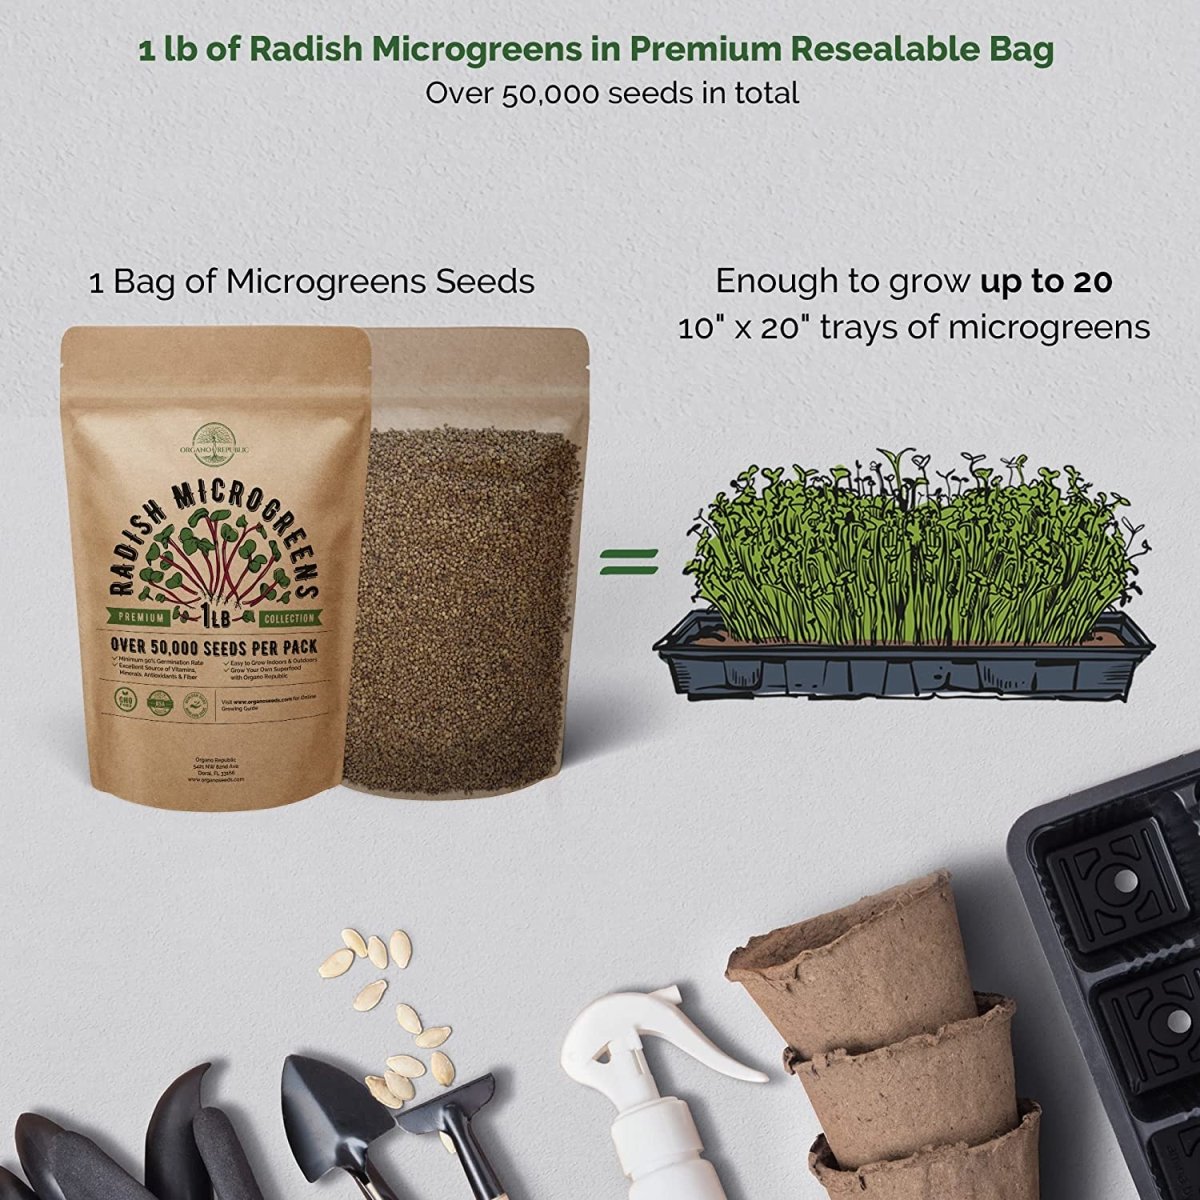 Radish Microgreens & 18 Culinary Herbs Seeds Bundle Non-GMO Heirloom Seeds for Planting Indoor and Outdoor Over 55,000 Microgreen & Herb Seeds in One Value Bundle - Organo Republic